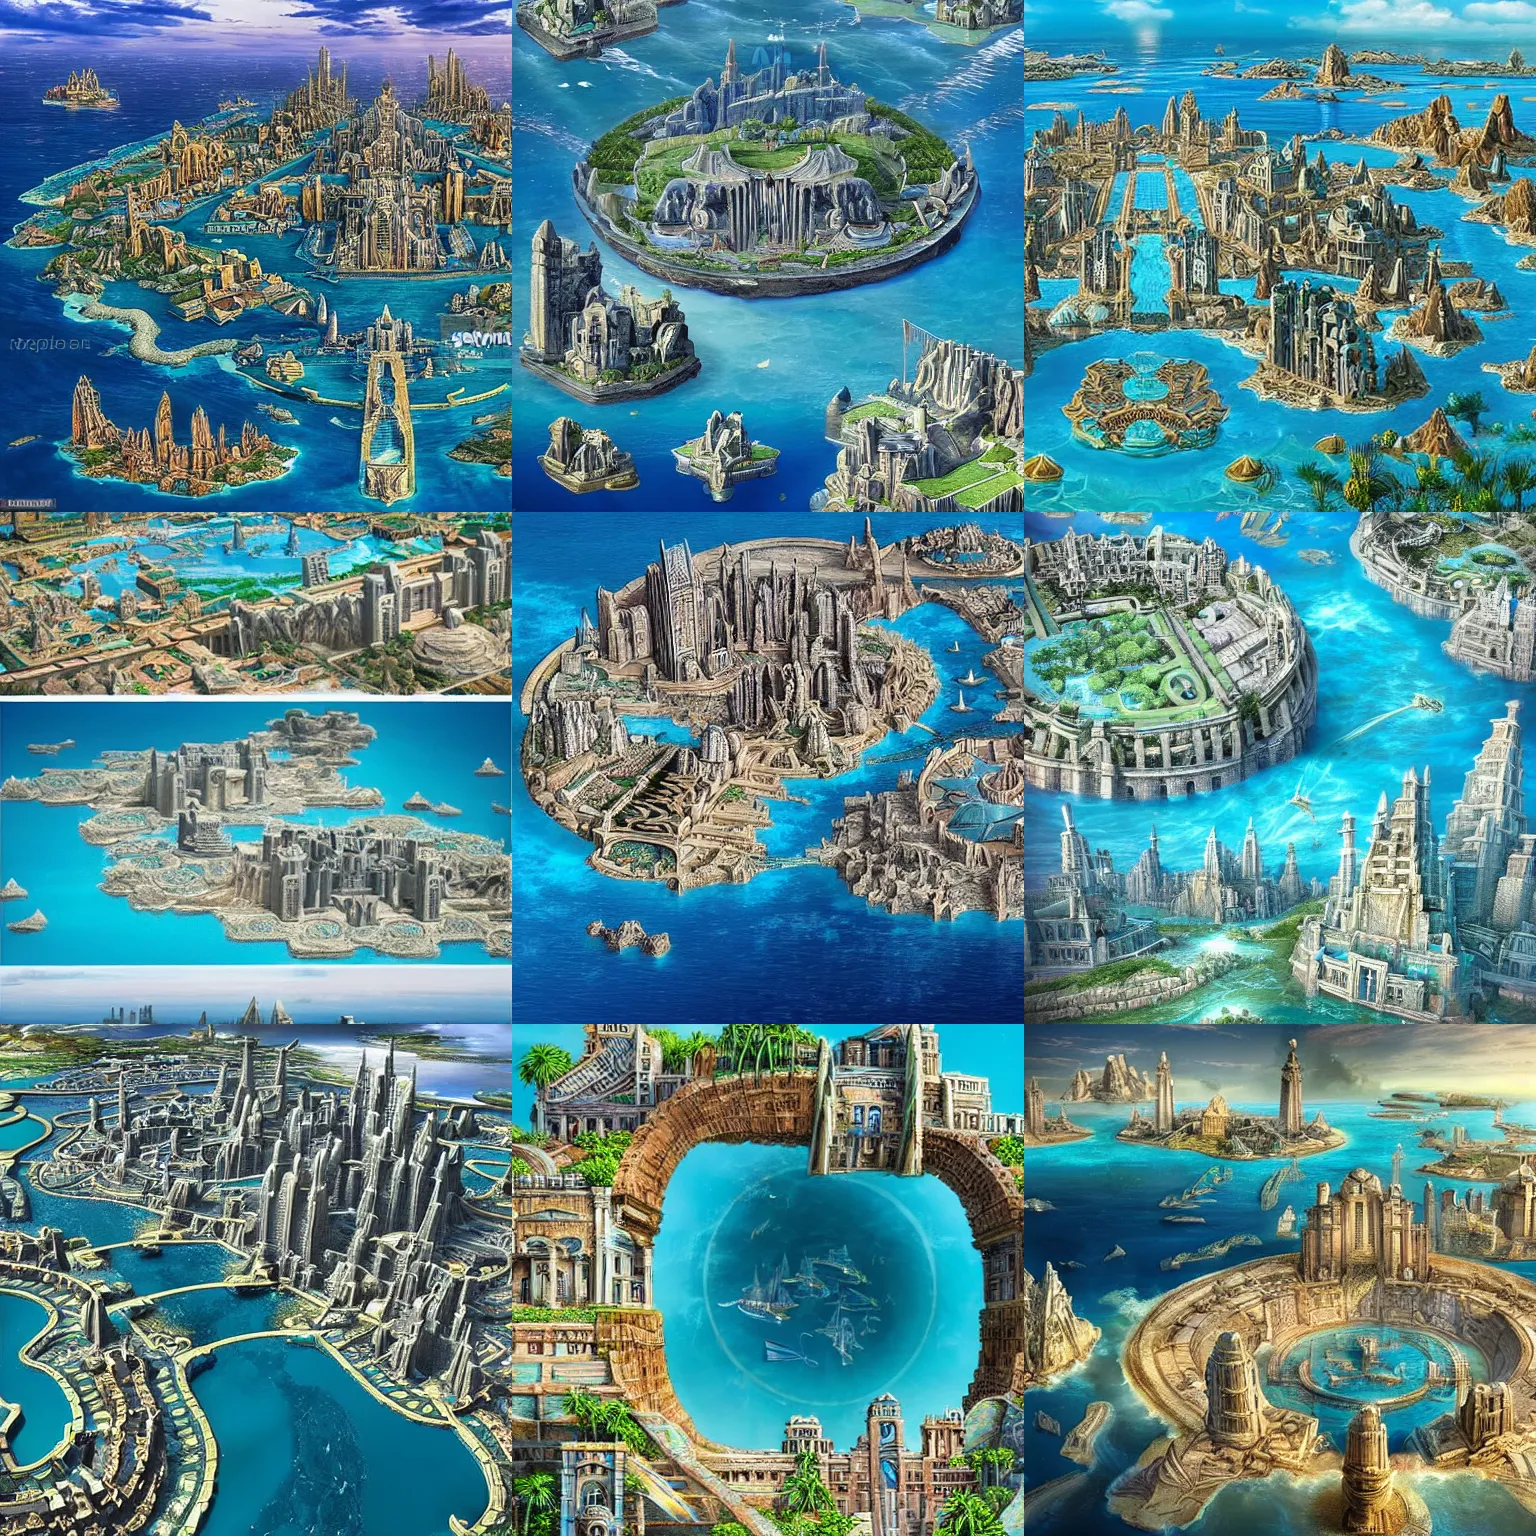 Prompt: the lost city of atlantis, seen from above in an epic scale with huge buildings in a fantasy style. the city is surrounded by a vast ocean, with ships sailing in the distance. the sky is a beautiful blue, with clouds floating in the air. the buildings are white and gold, with intricate designs. the city is a beautiful sight to behold.